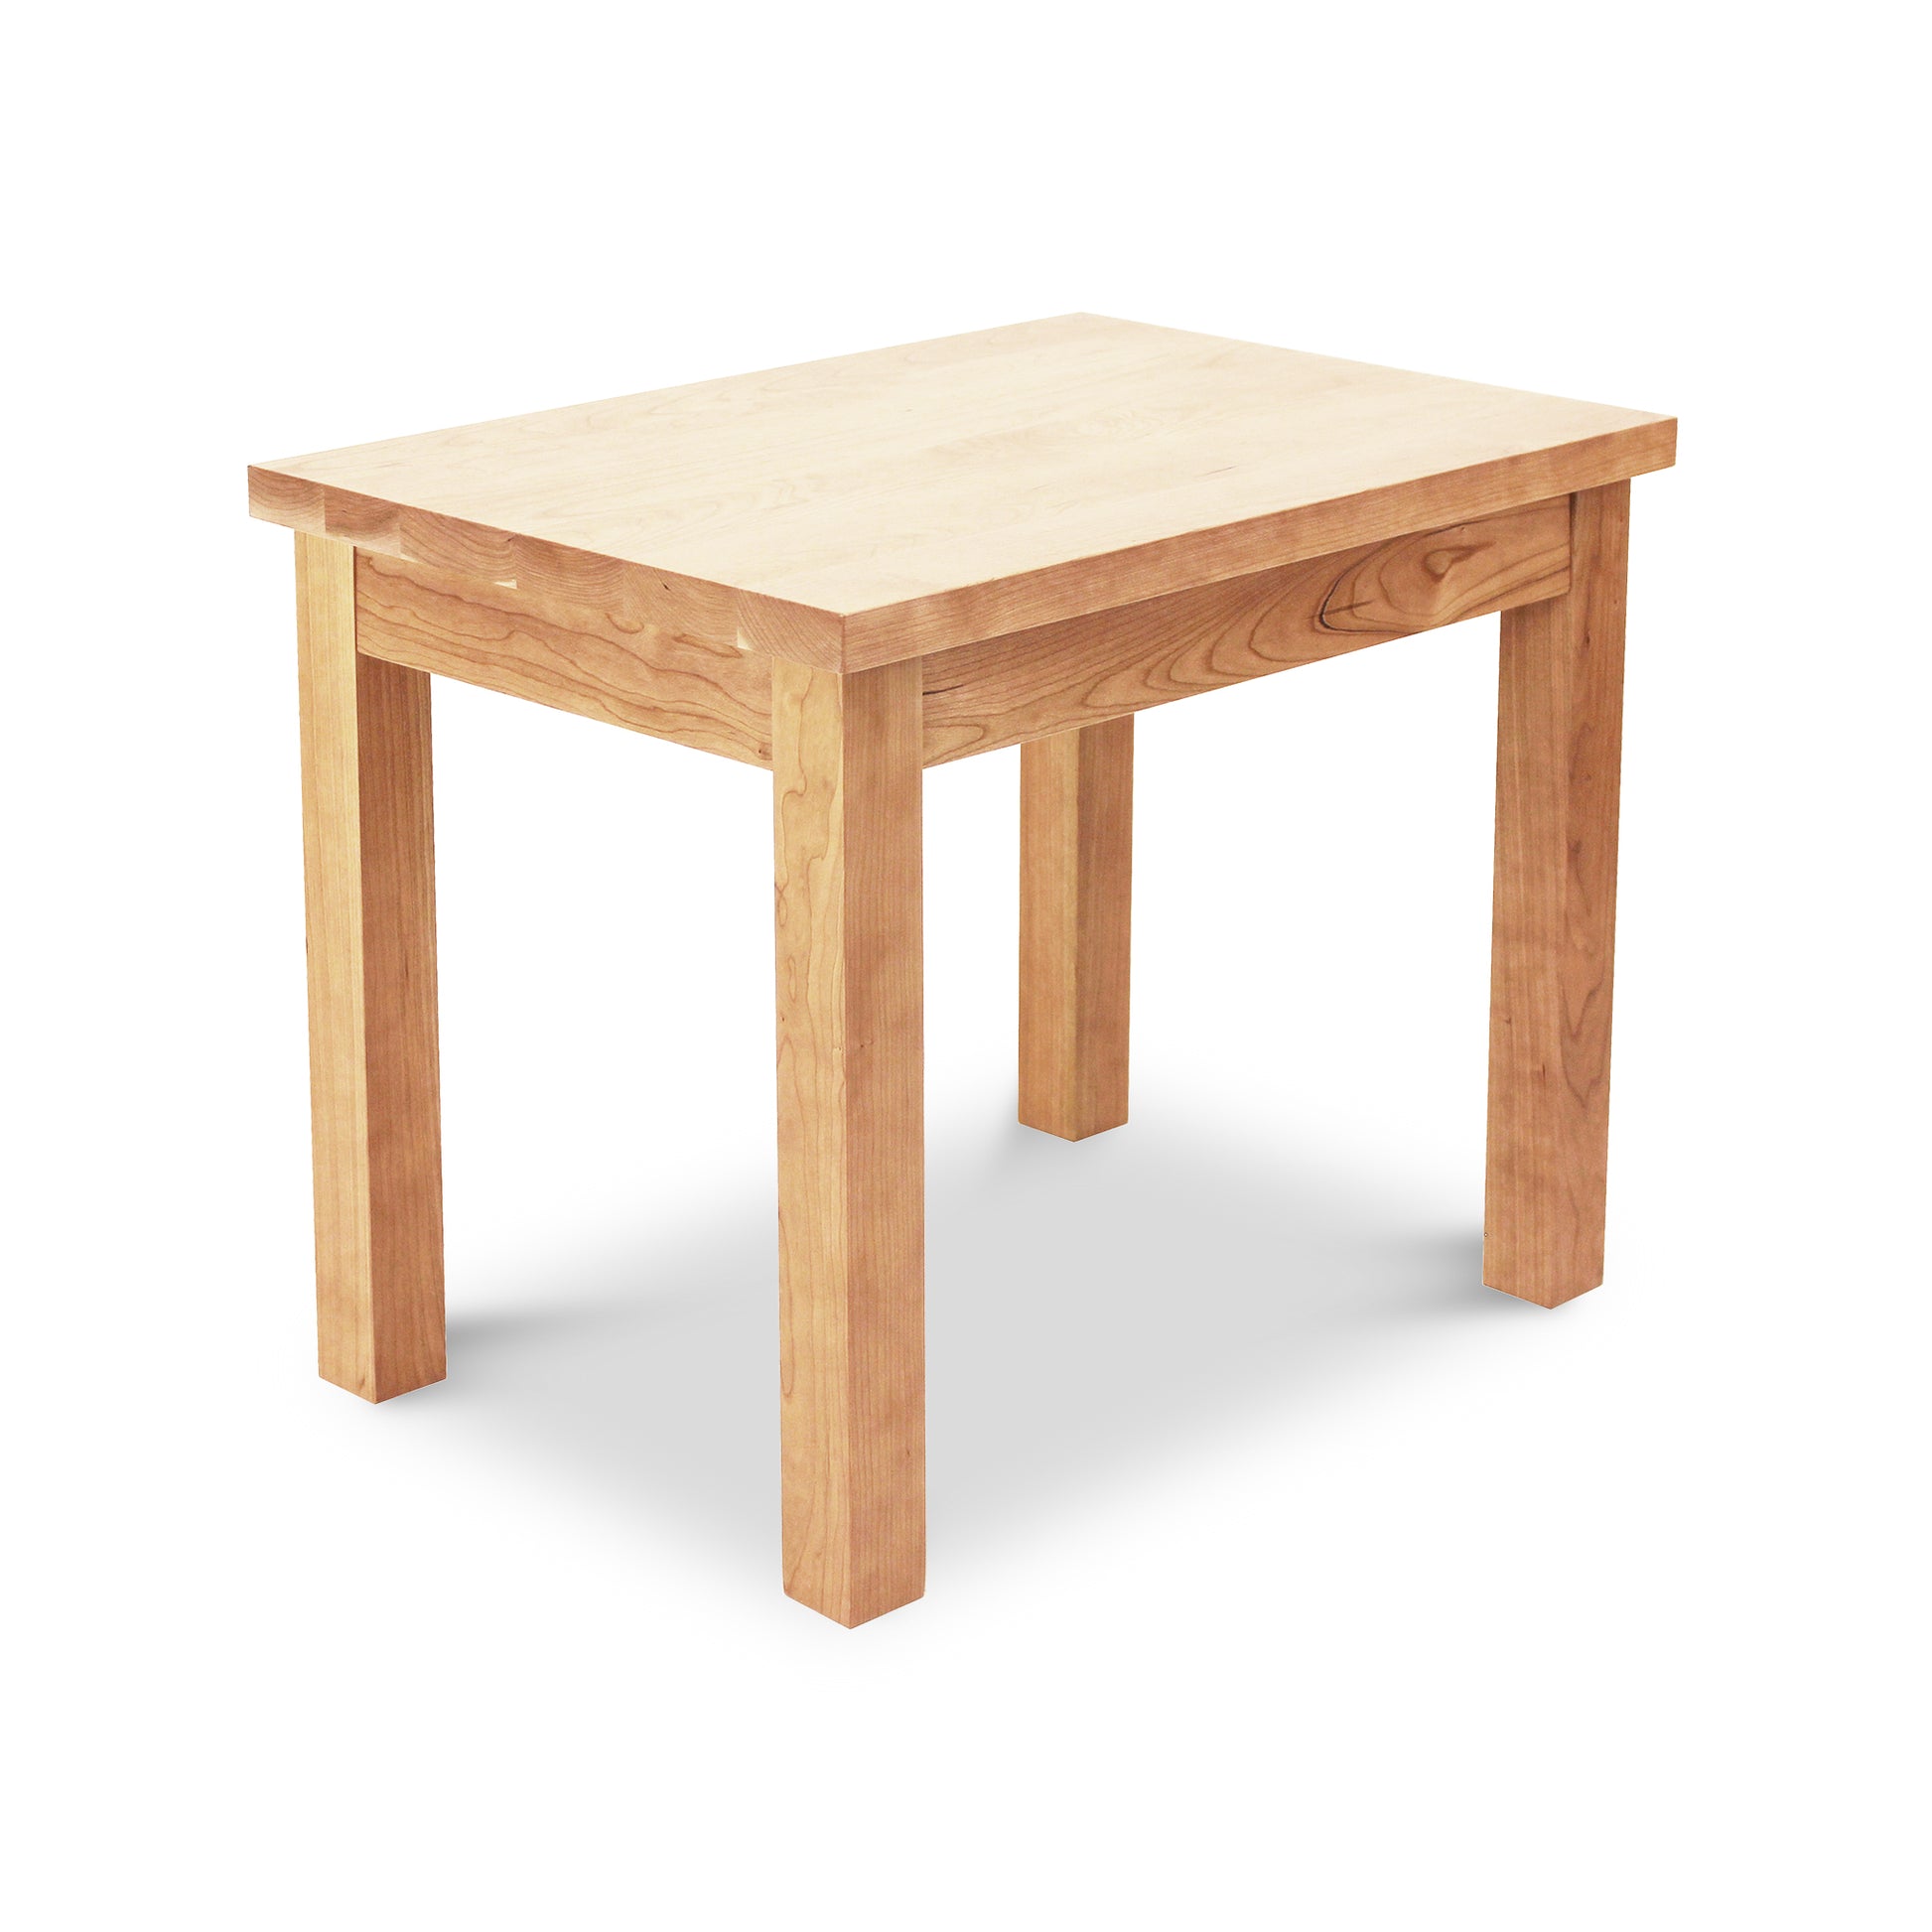 A Lyndon Furniture Modern Mission End Table with mission leg on a white background.